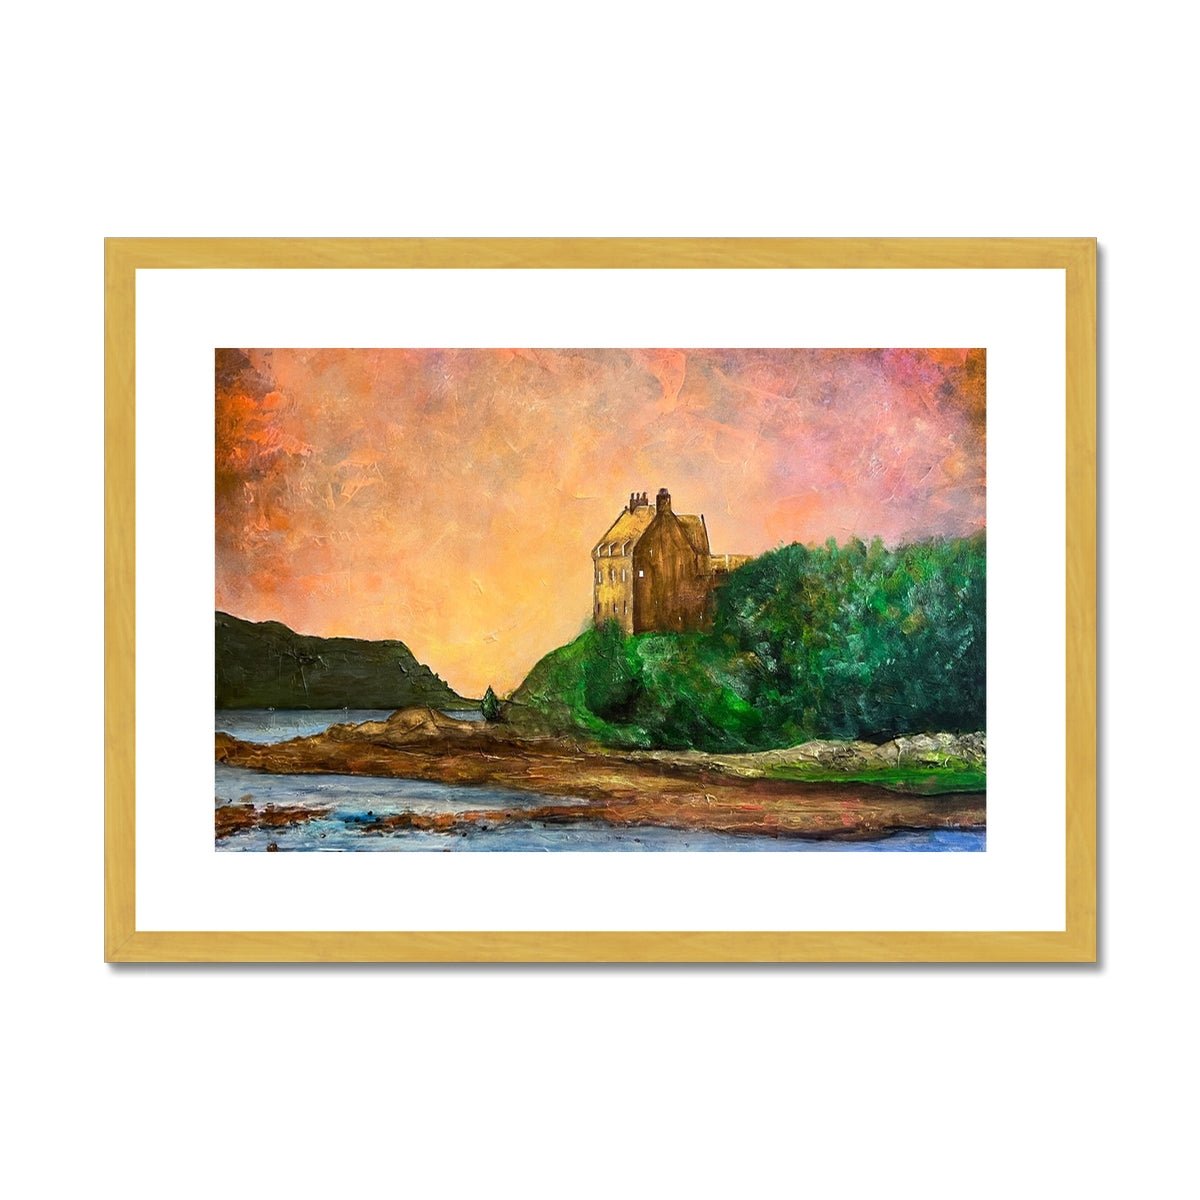 Duntrune Castle Painting | Antique Framed & Mounted Prints From Scotland-Antique Framed & Mounted Prints-Historic & Iconic Scotland Art Gallery-A2 Landscape-Gold Frame-Paintings, Prints, Homeware, Art Gifts From Scotland By Scottish Artist Kevin Hunter